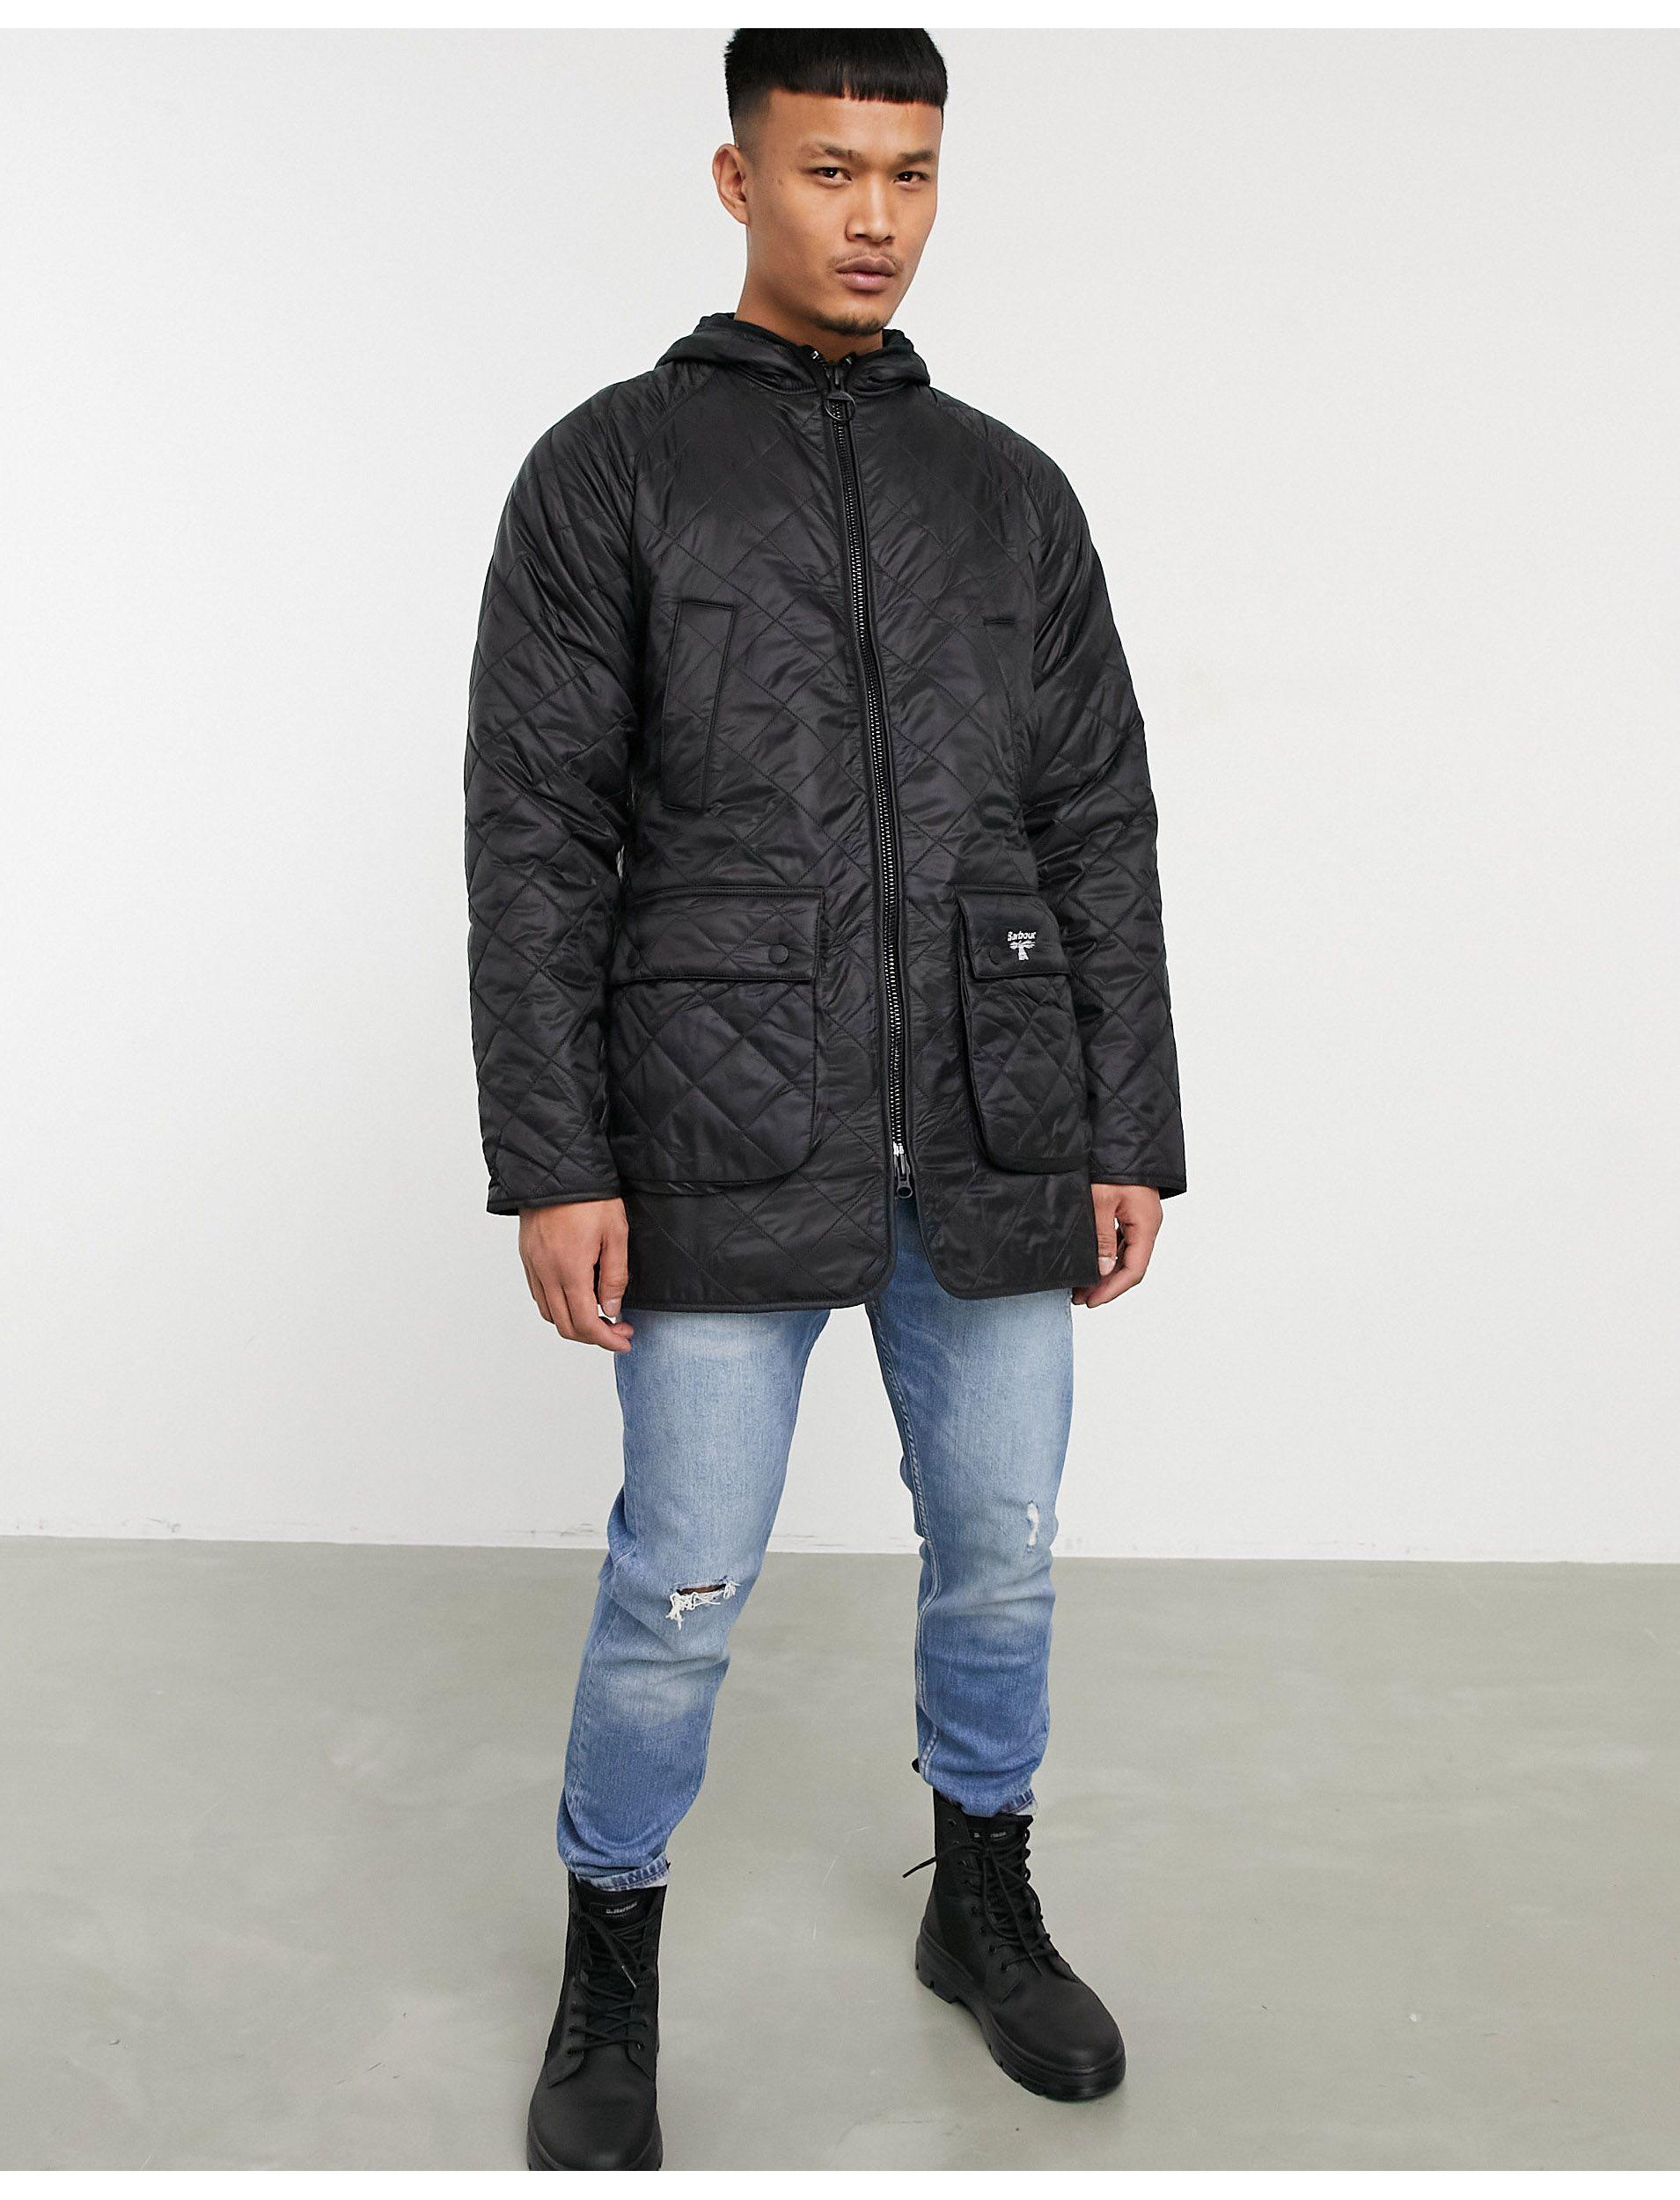 Barbour Bedale Hooded Quilted Jacket in Black for Men - Lyst